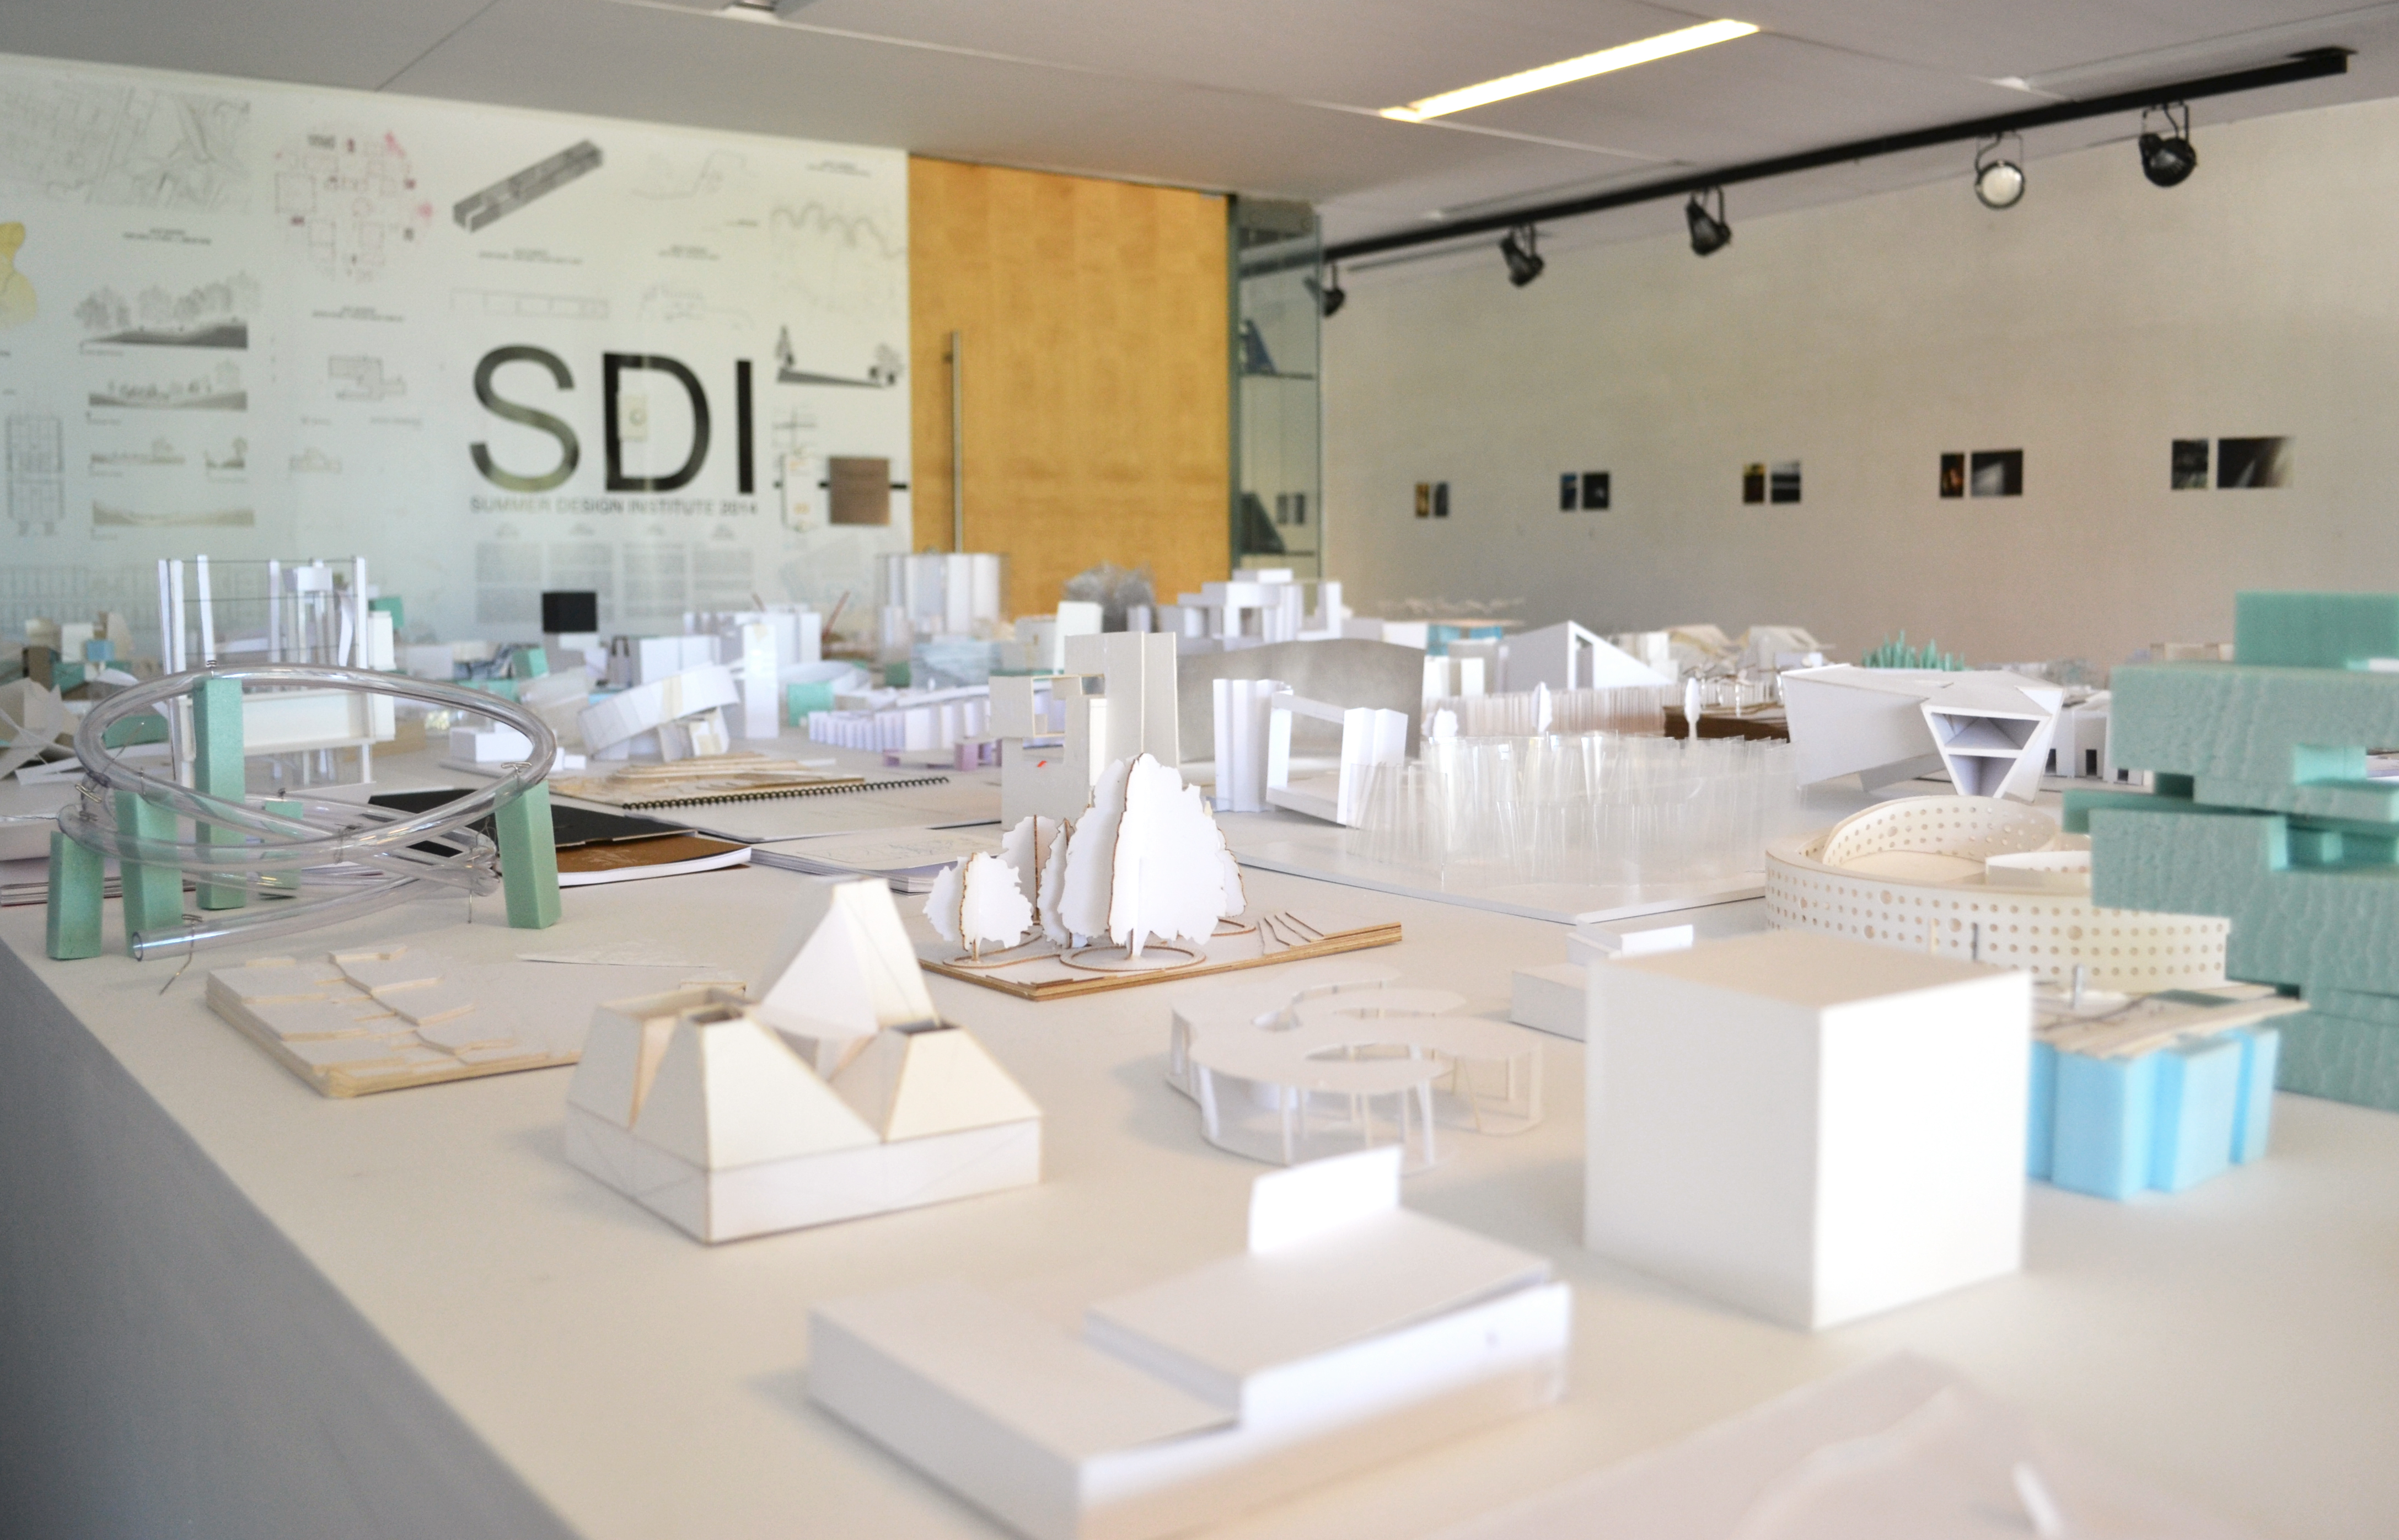 Models of buildings sit on a table